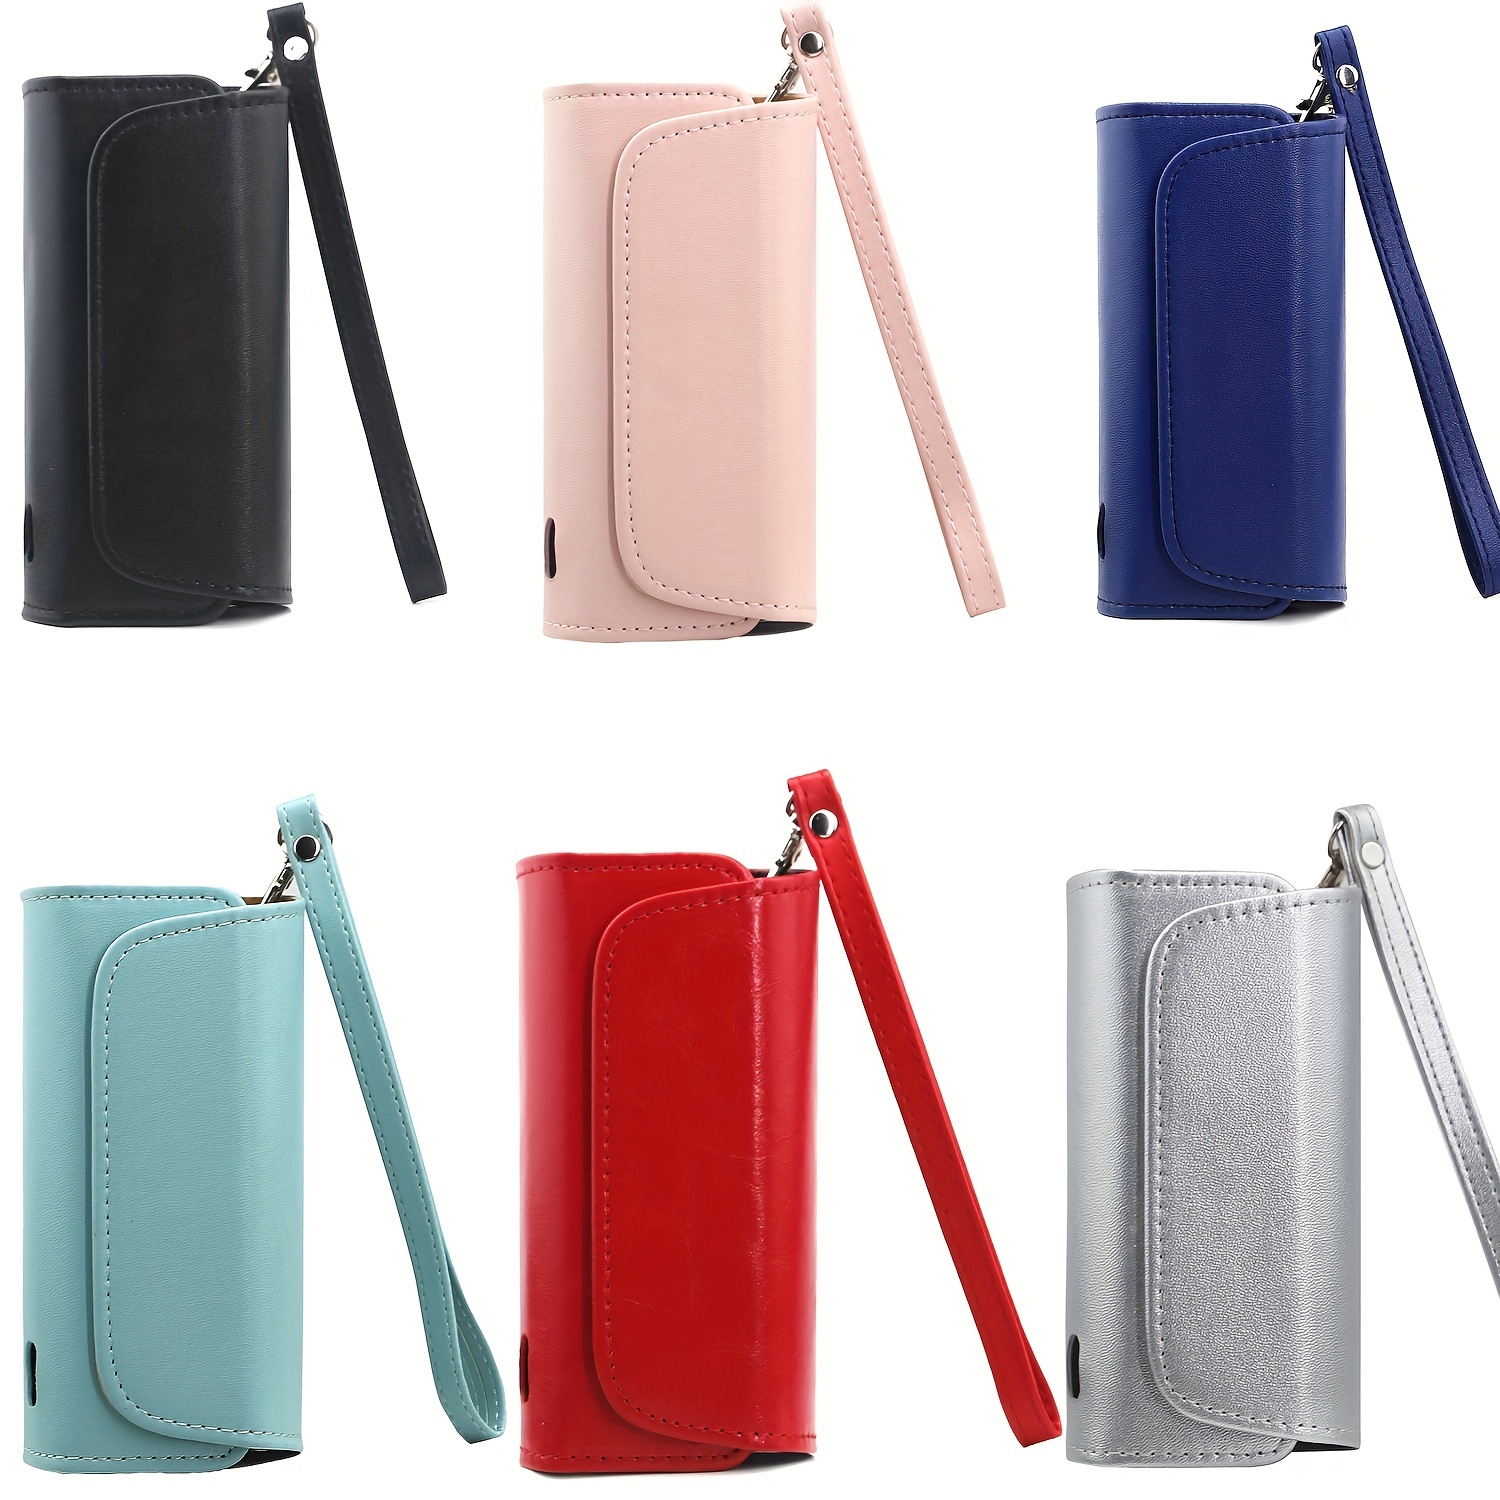 For IQOS ILUMA E-cigarette Portable Leather Protective Case Drop-proof Cover  Storage Bag with Ring Buckle - Blue Leather/Blue Denim Wholesale